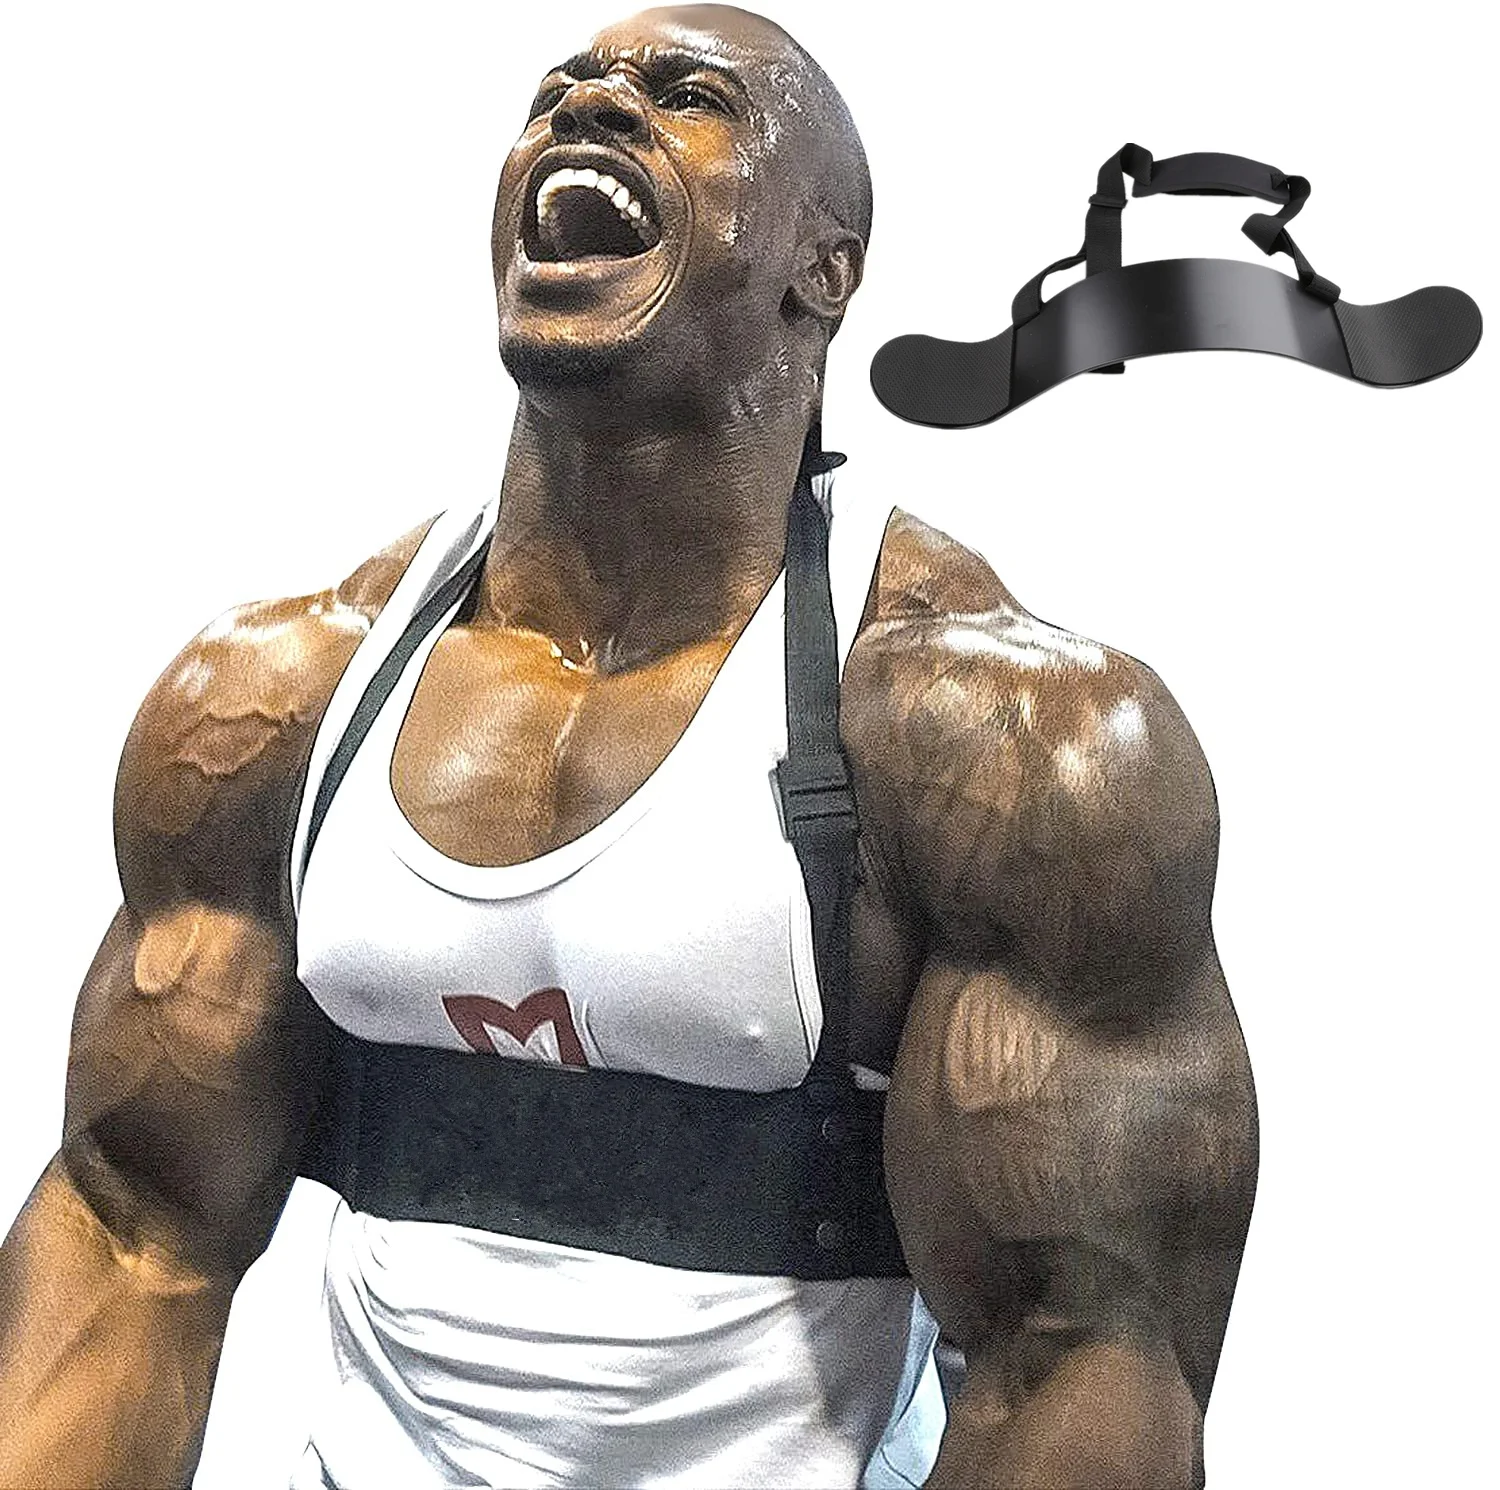 

Weightlifting Arm Blaster Biceps Training Adjustable Aluminum Bodybuilding Gym Curl Triceps Forearm Trainer Fitness Equipment